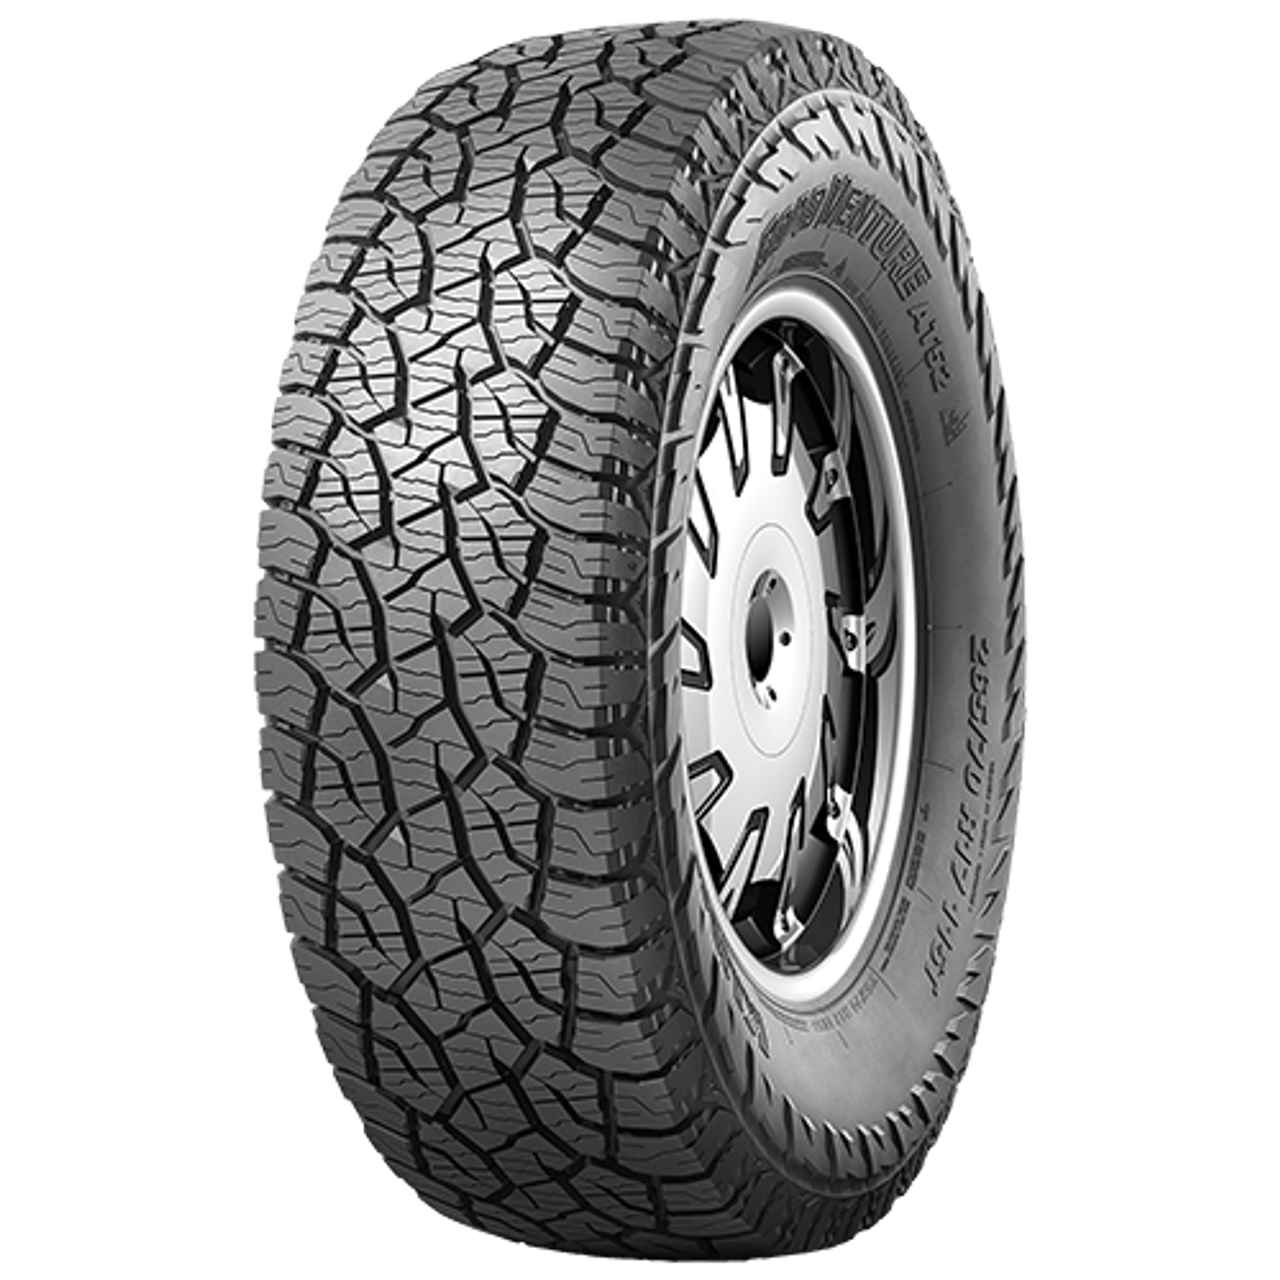 KUMHO ROAD VENTURE AT52 265/70R17 121S BSW